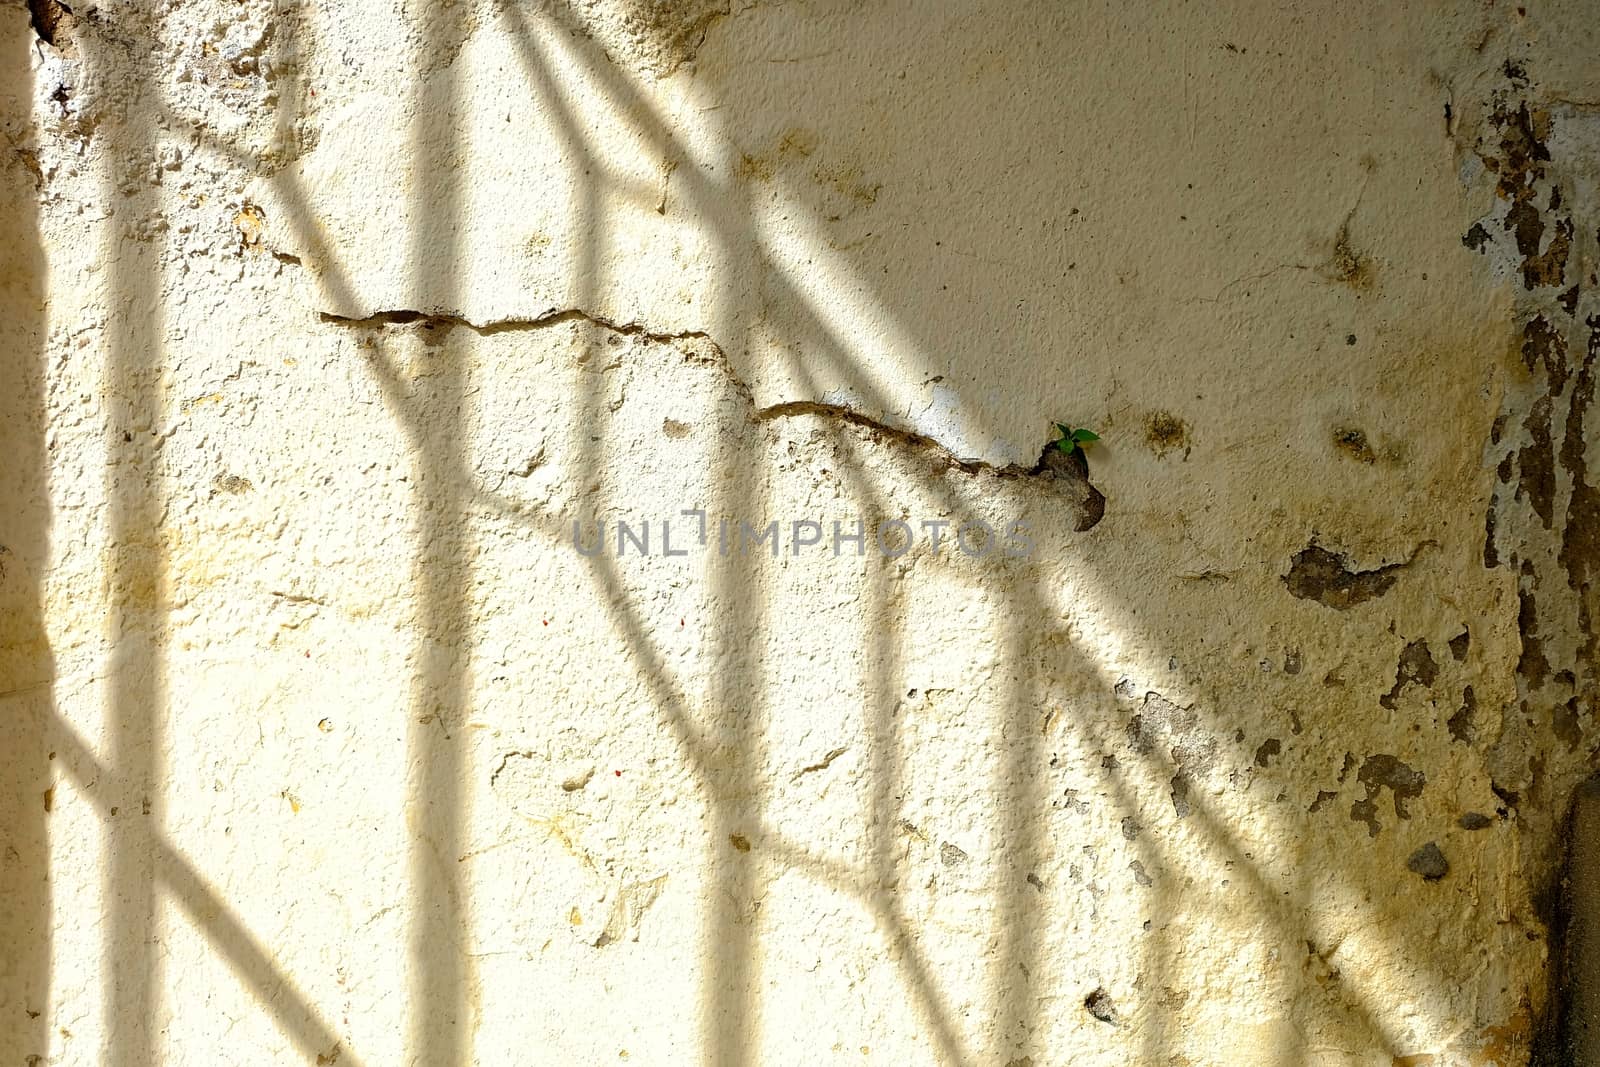 Shadow of Fence on Grunge Concrete Wall. by mesamong